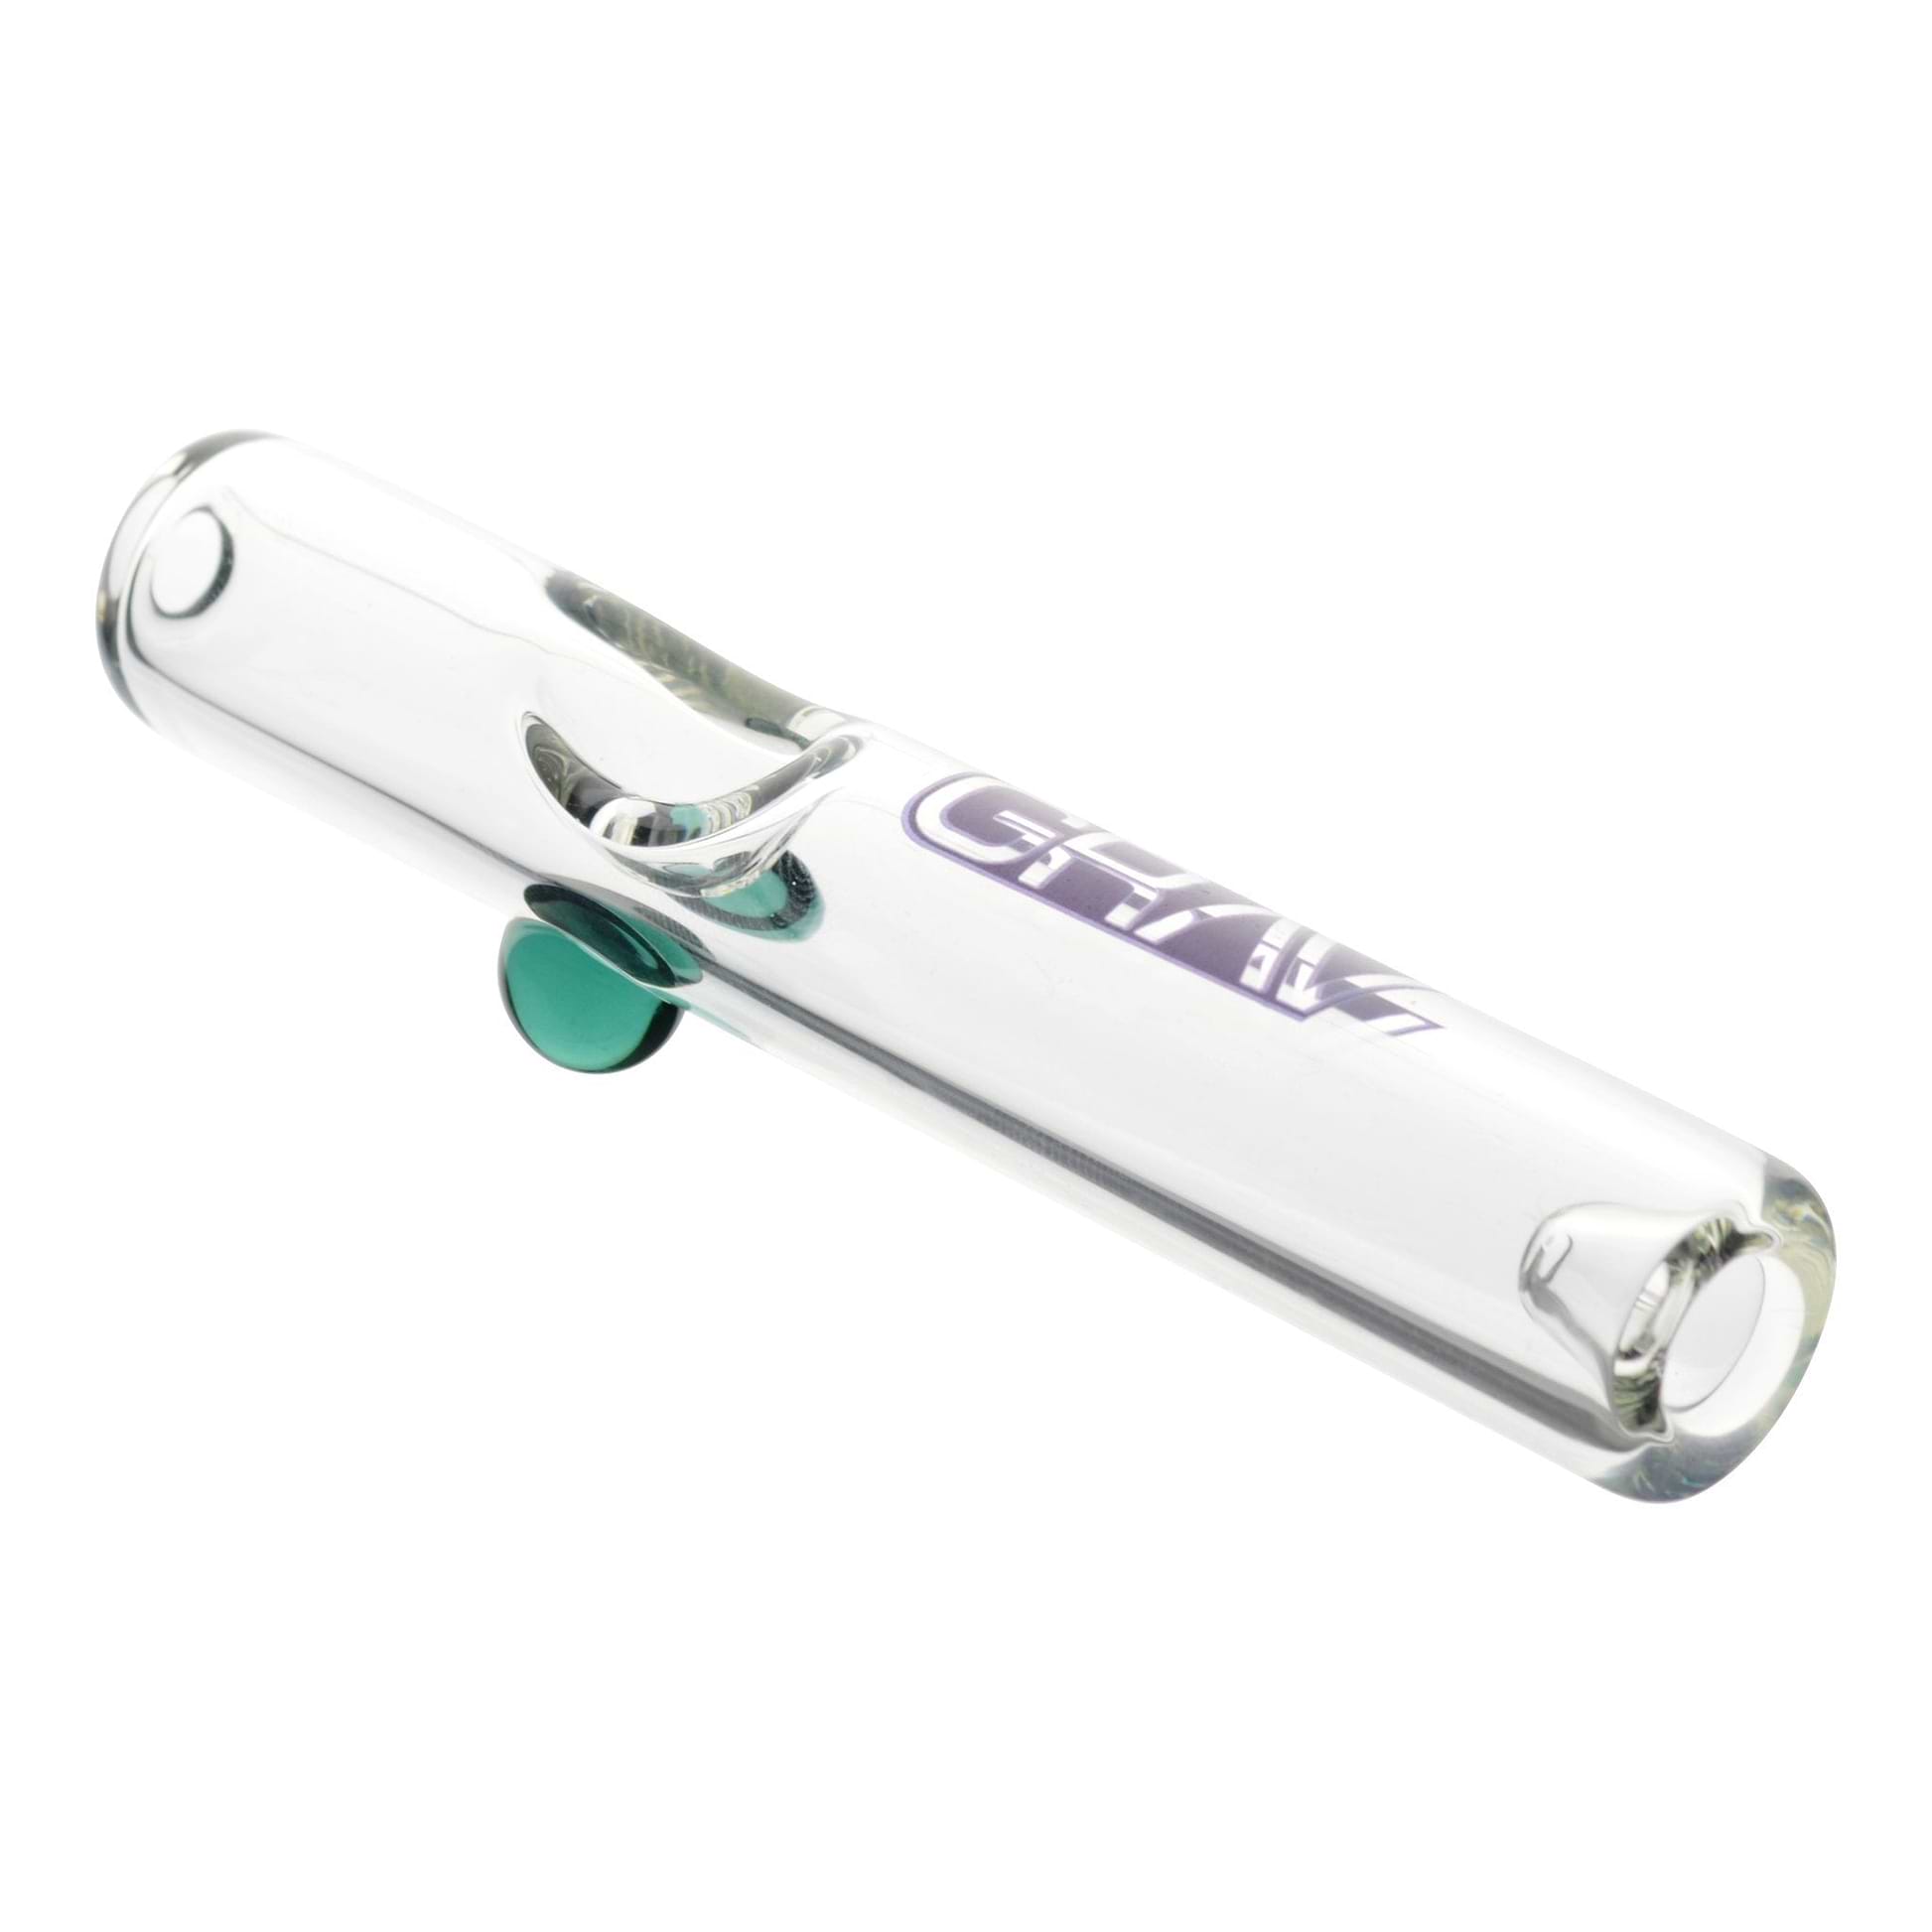 Glass GRAV steamroller smoking accessory test-tube look and design clear classic look